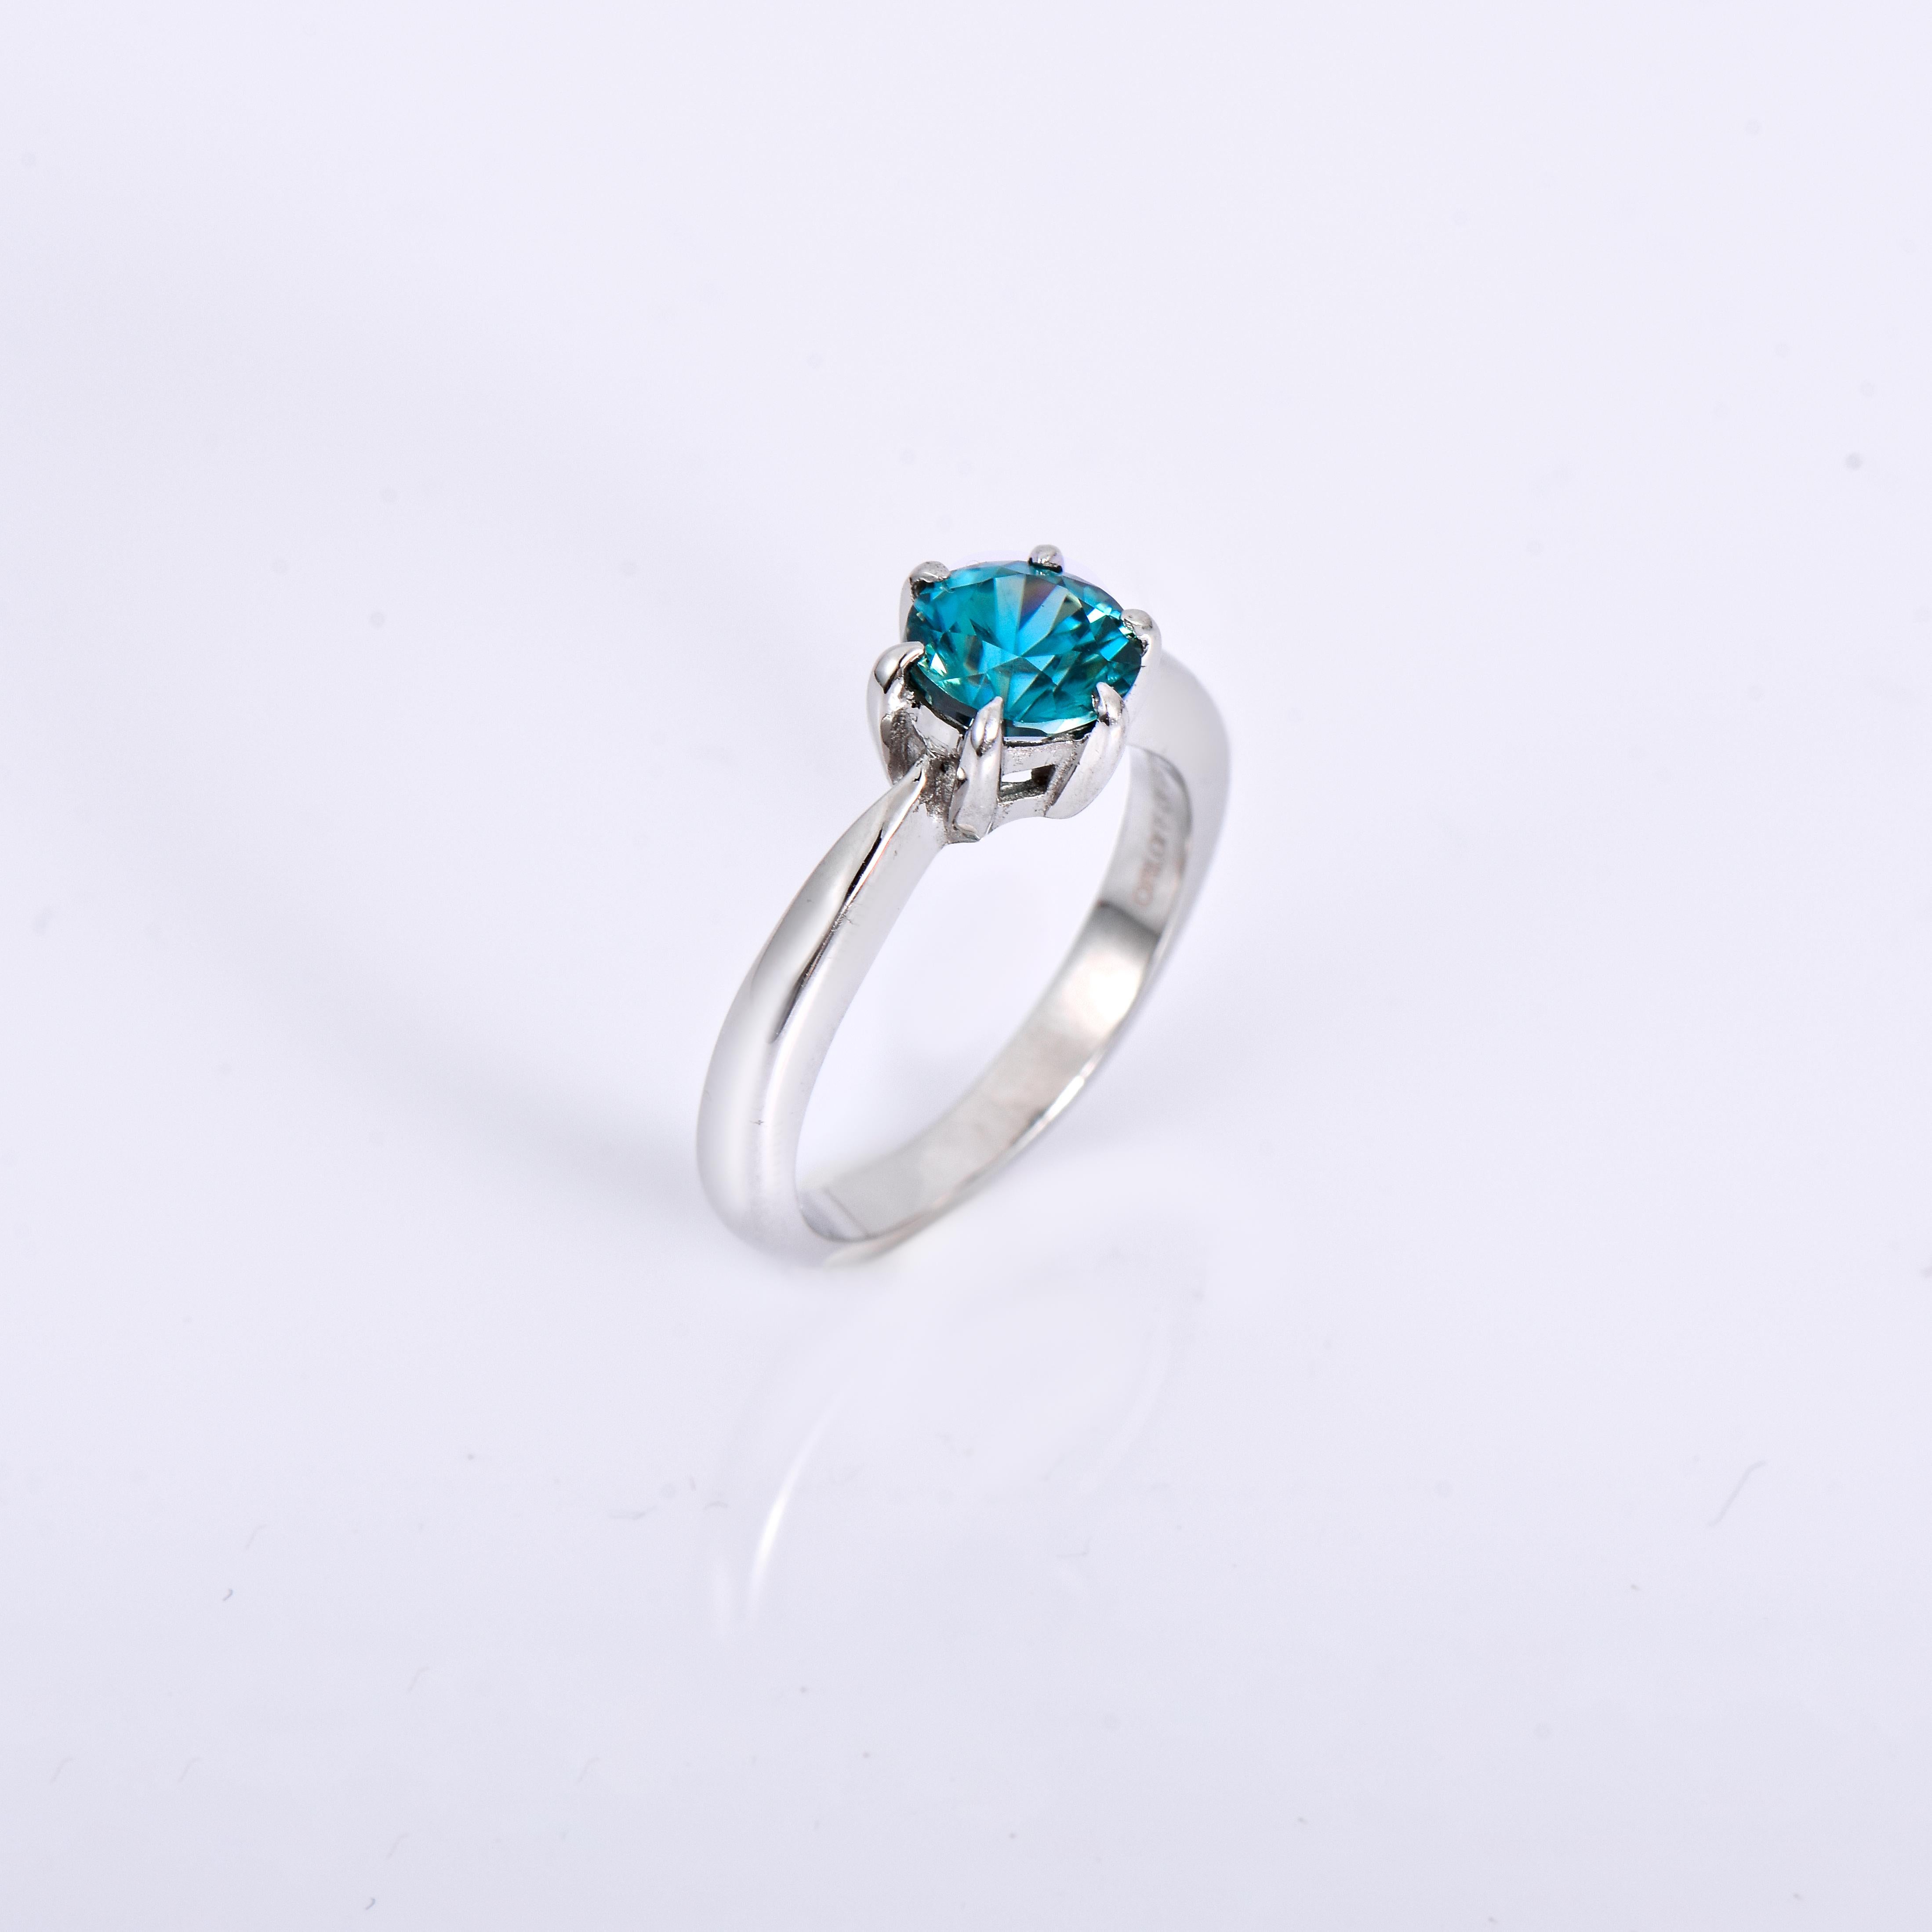 Orloff of Denmark; 925 Sterling Silver Ring set with a 1.46 carat Natural Cambodian Blue Zircon.

This piece has been meticulously hand-crafted out of 925 sterling silver.
In the center, set with 4 claw-prongs, is a gorgeous 1.46 carat blue zircon